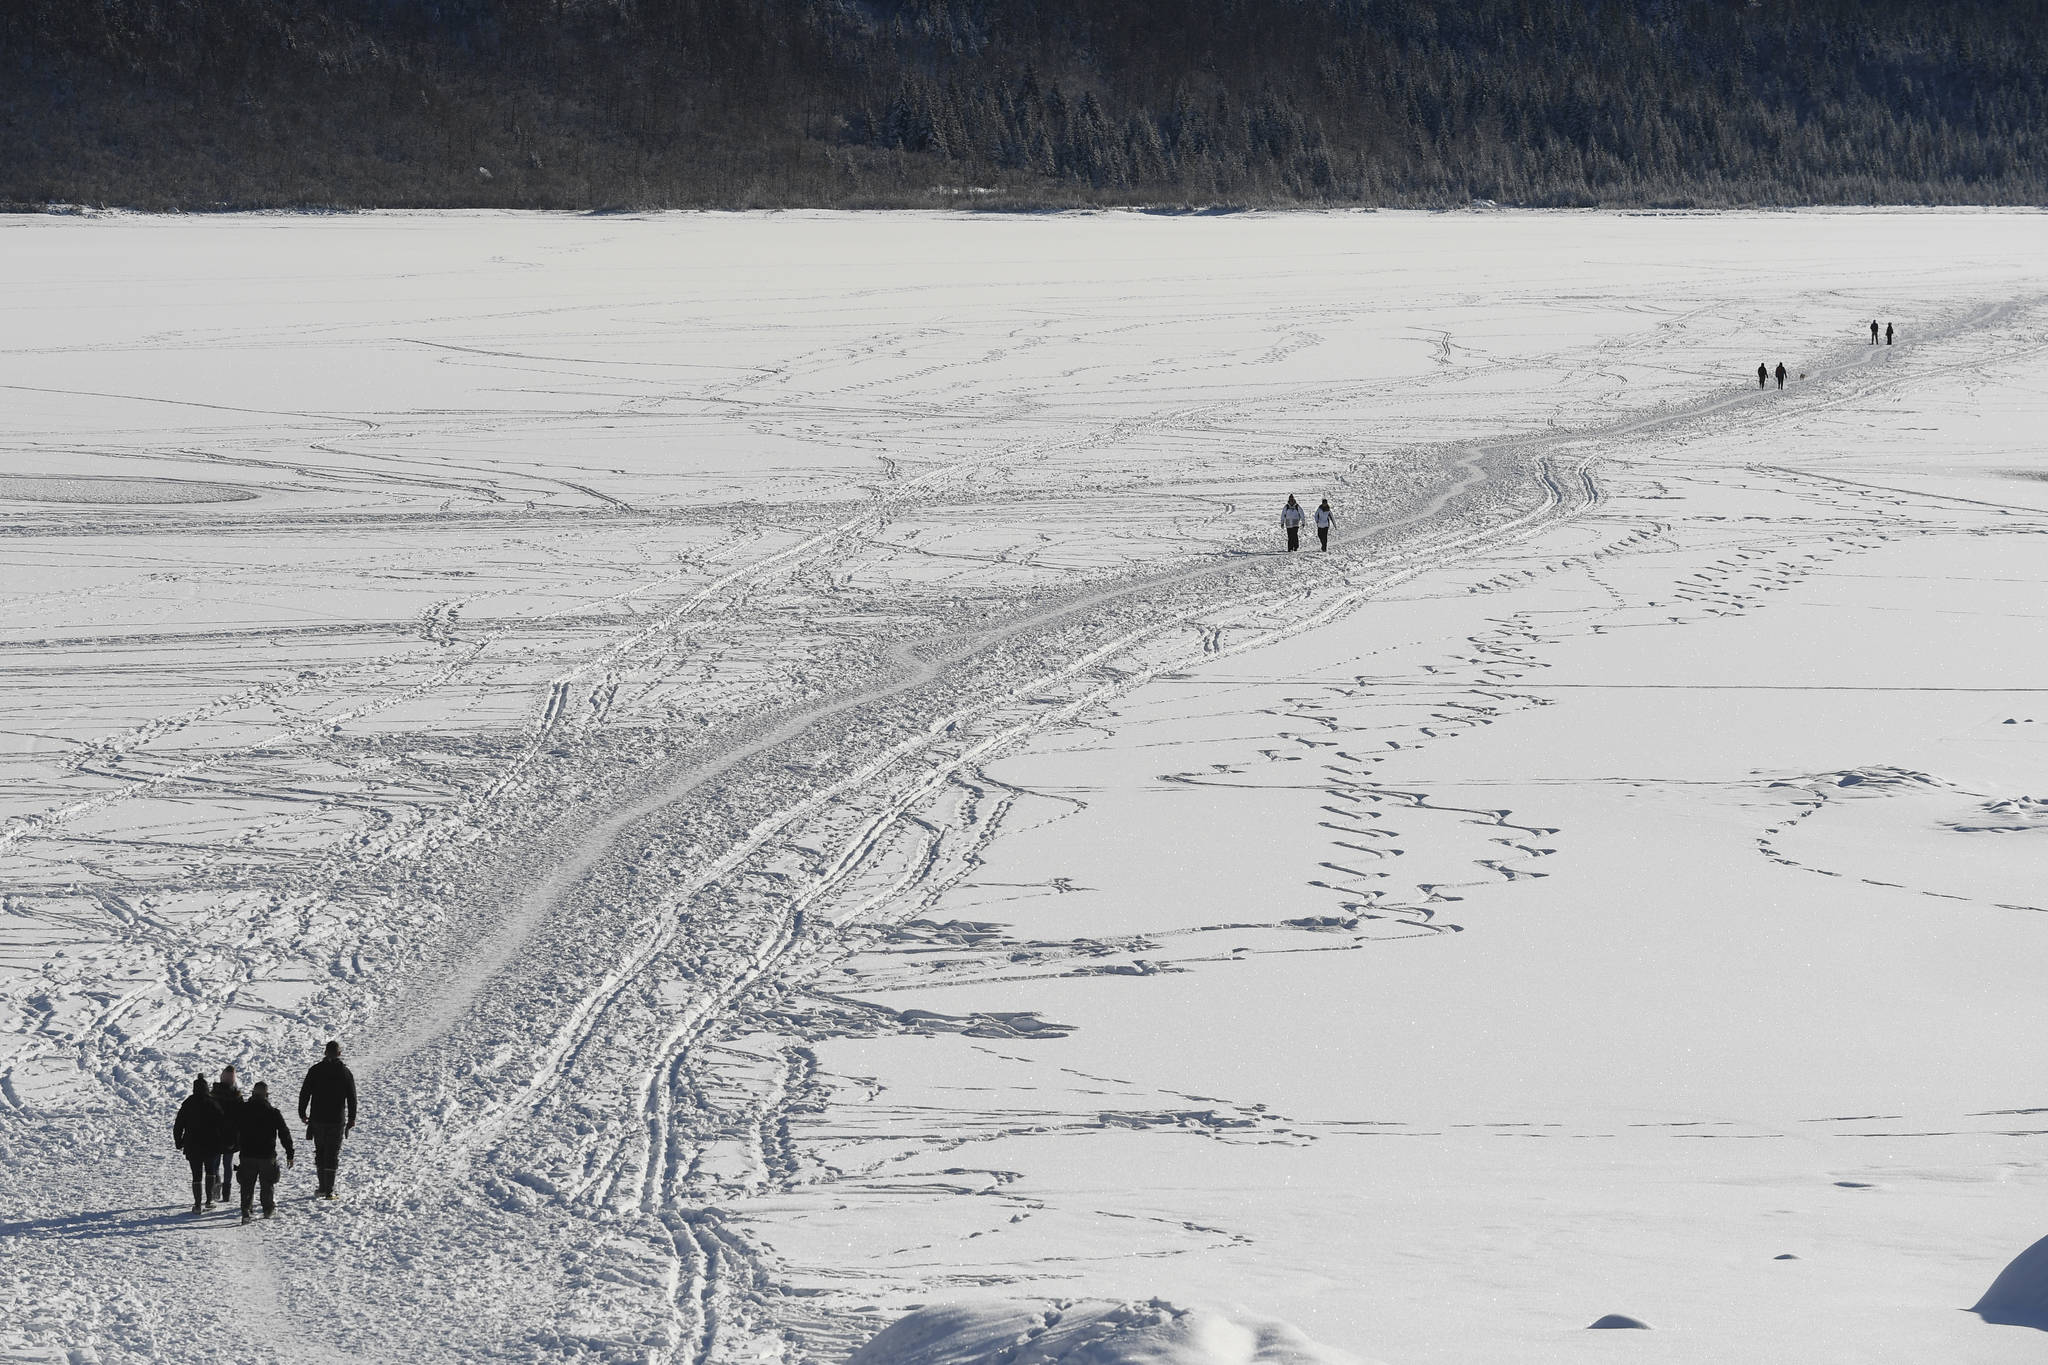 People walk to and from the Mendenhall Glacier on the frozen Mendenhall Lake on Monday, Feb. 11, 2019. (Michael Penn | Juneau Empire)